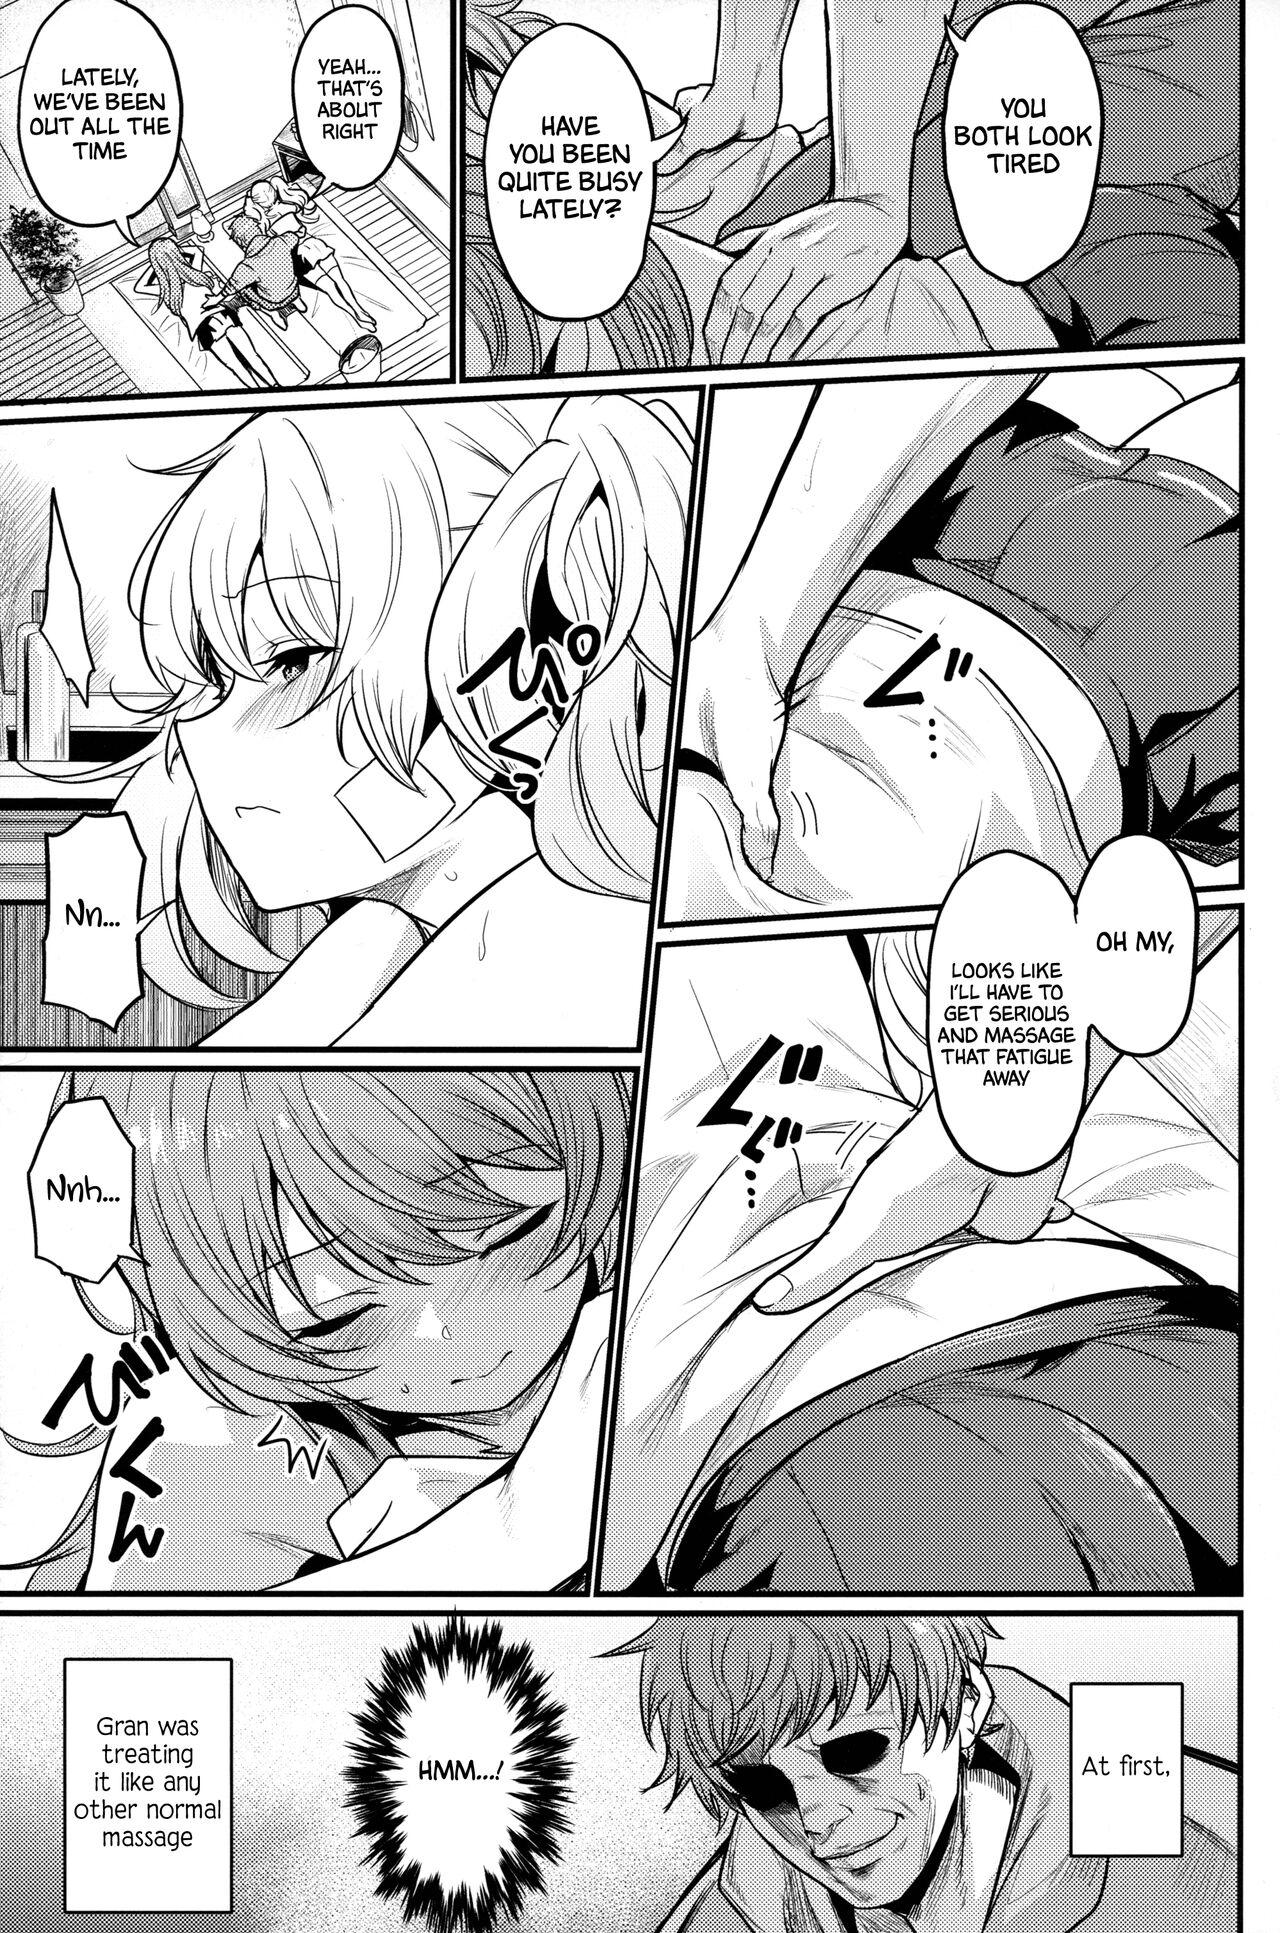 Pussy To Mouth Chitsujo Hustle! - Granblue fantasy Amatures Gone Wild - Page 4